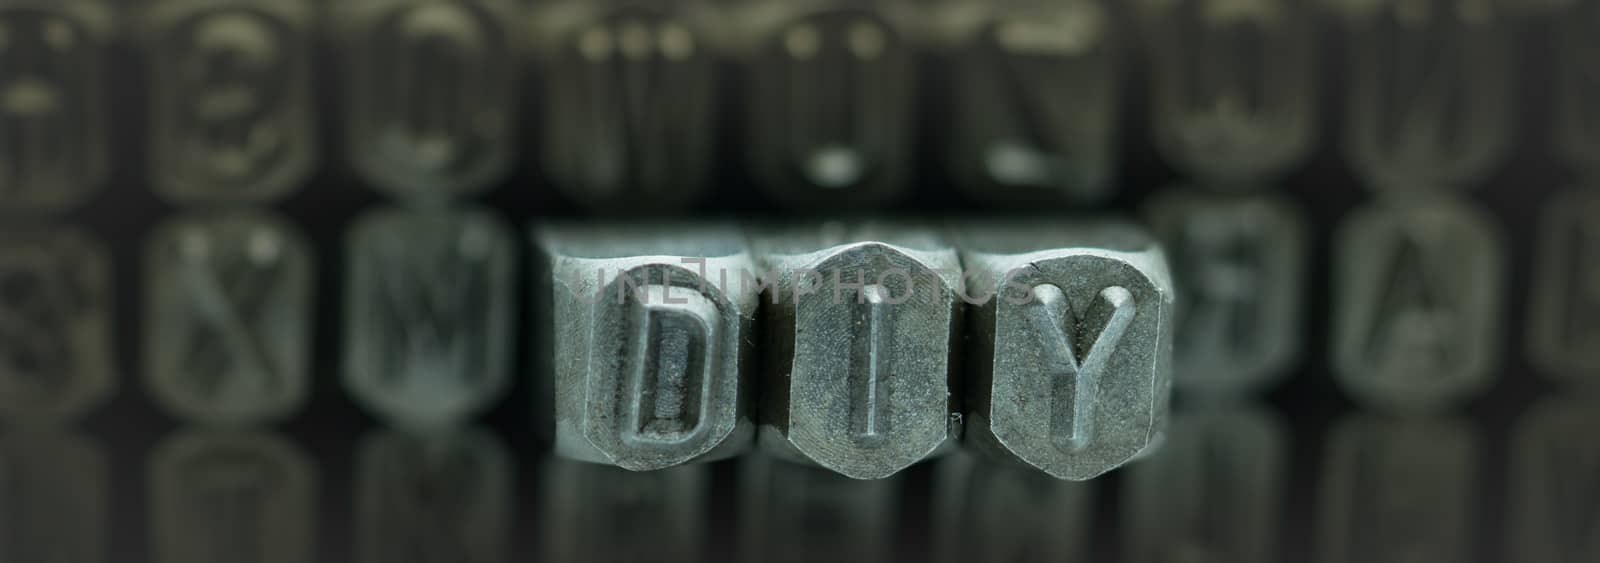 DIY spelled from metal stamp alphabet punch, DIY words stand for Do It Yourself concept by Fahroni